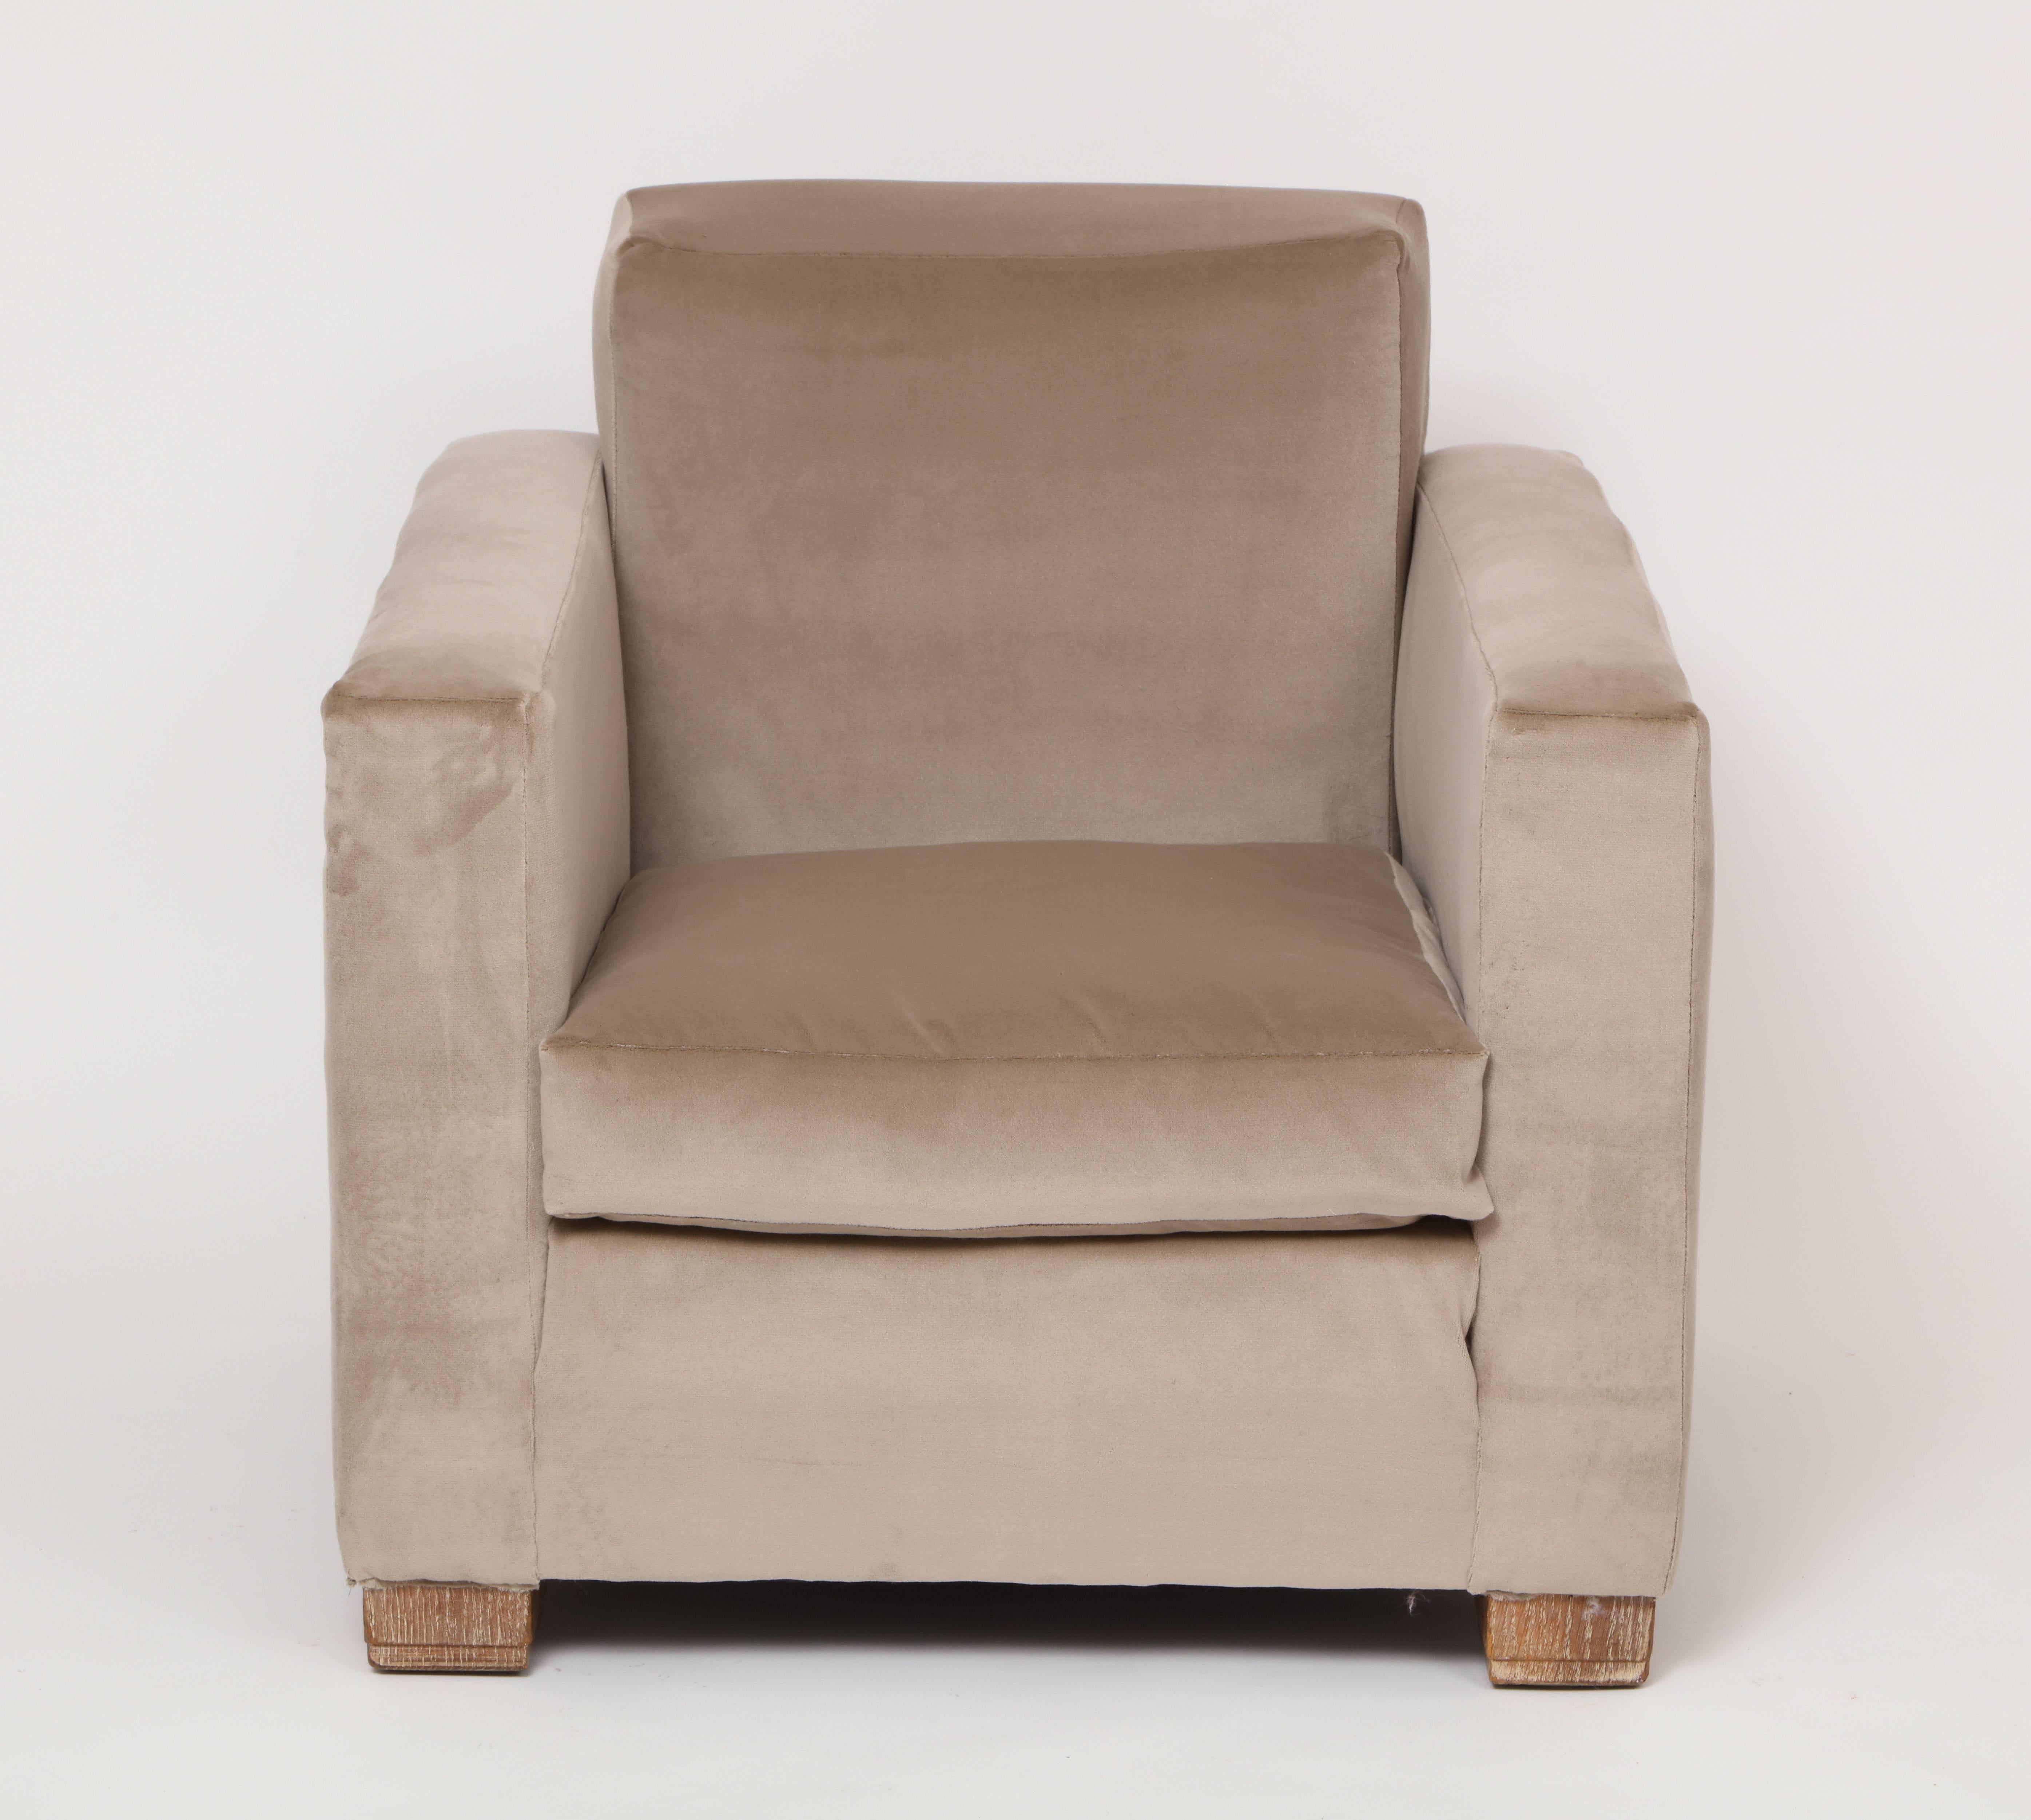 Jacques Adnet Attributed Mid-Century Cerused Lounge Club Chair, French, 1940s.
This is a Jacques Adnet attributed club chair in newly upholstered in heavy grey velvet.
It is extremely comfortable and down filled from it's original